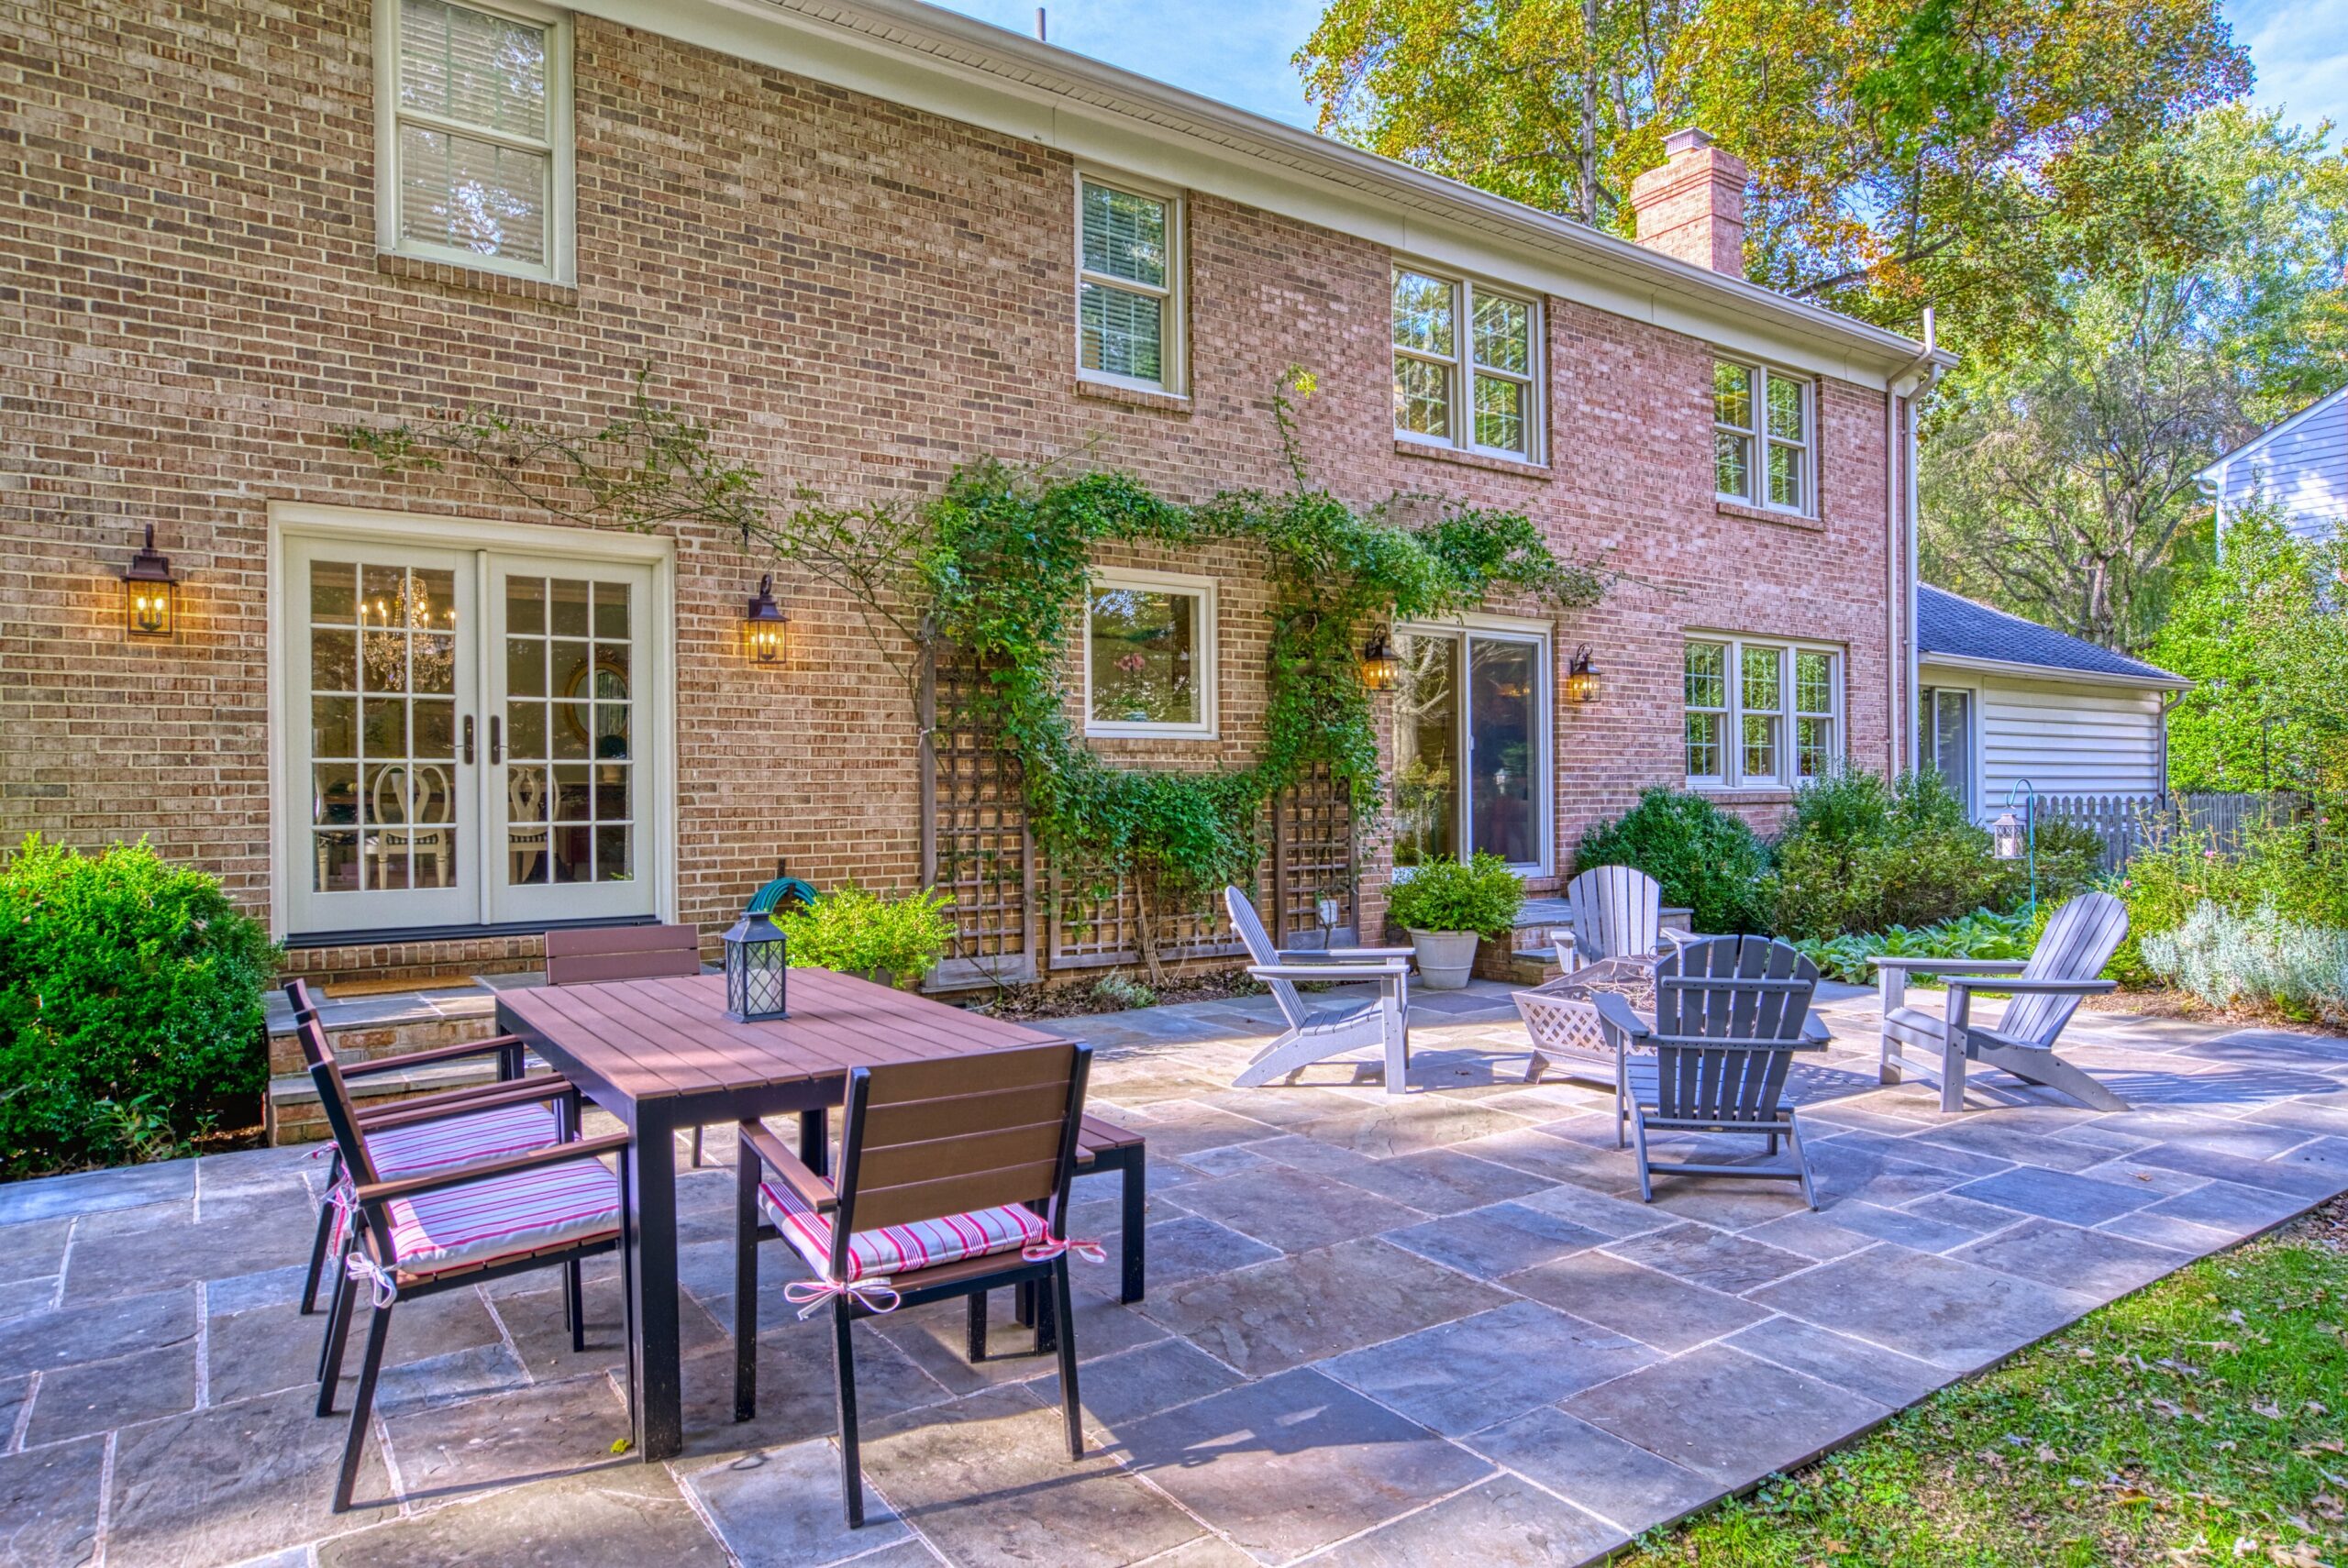 Professional exterior photo of 8305 River Falls Dr, Potomac, MD - rear shot showing most of large patio with 2 sets of patio furniture behind the red brick home